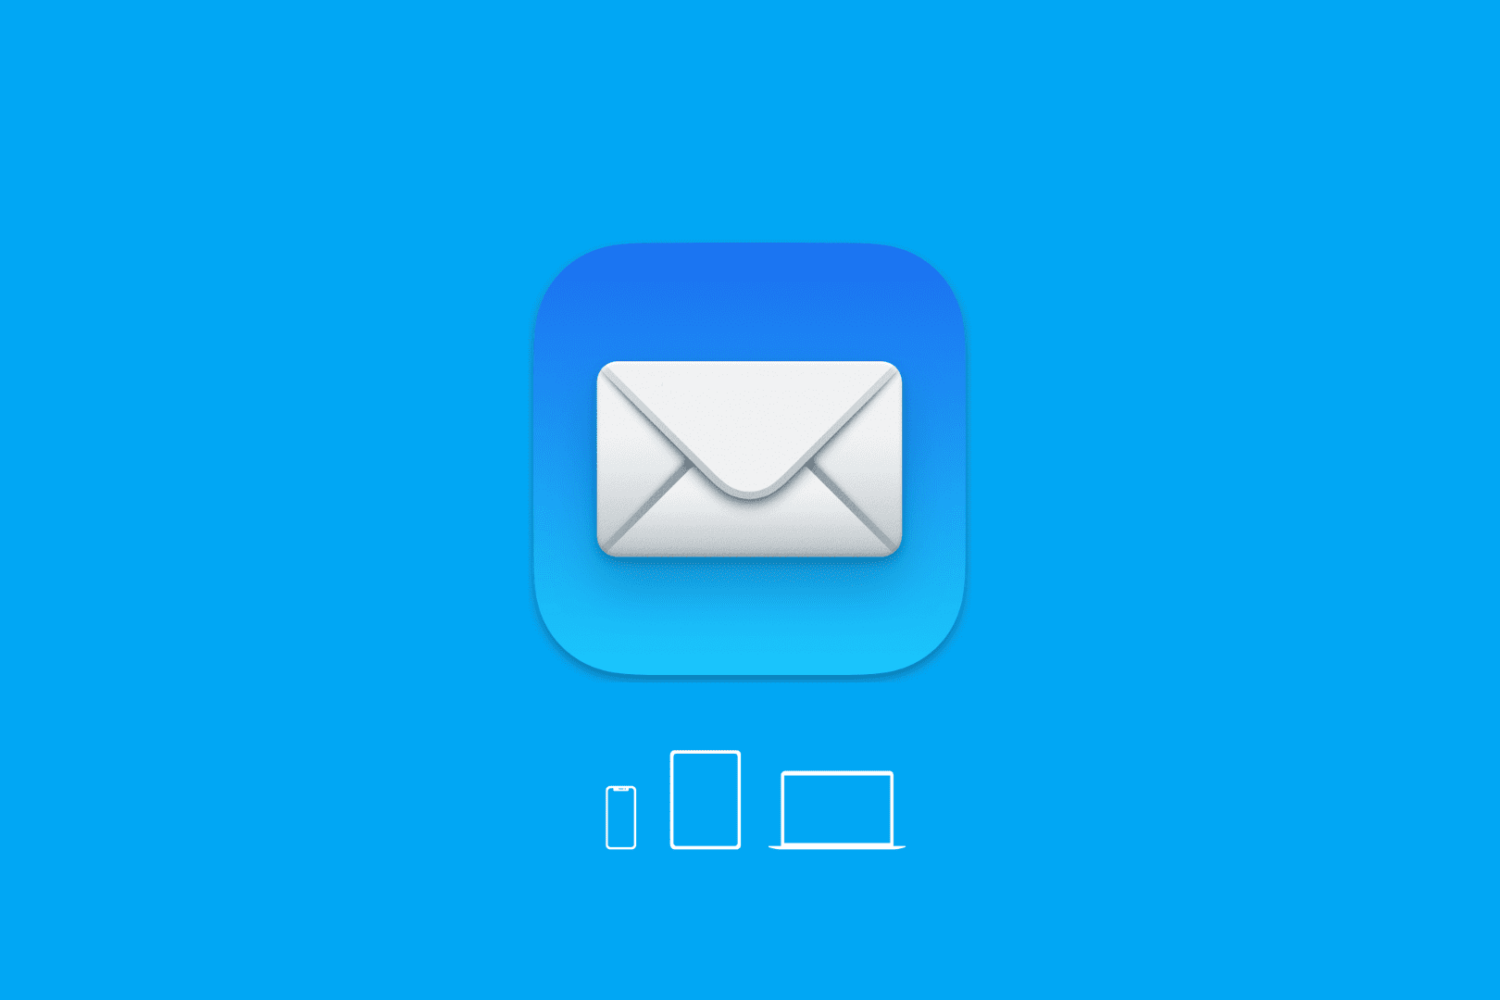 Mail app icon with illustrations for iPhone, iPad, and MacBook